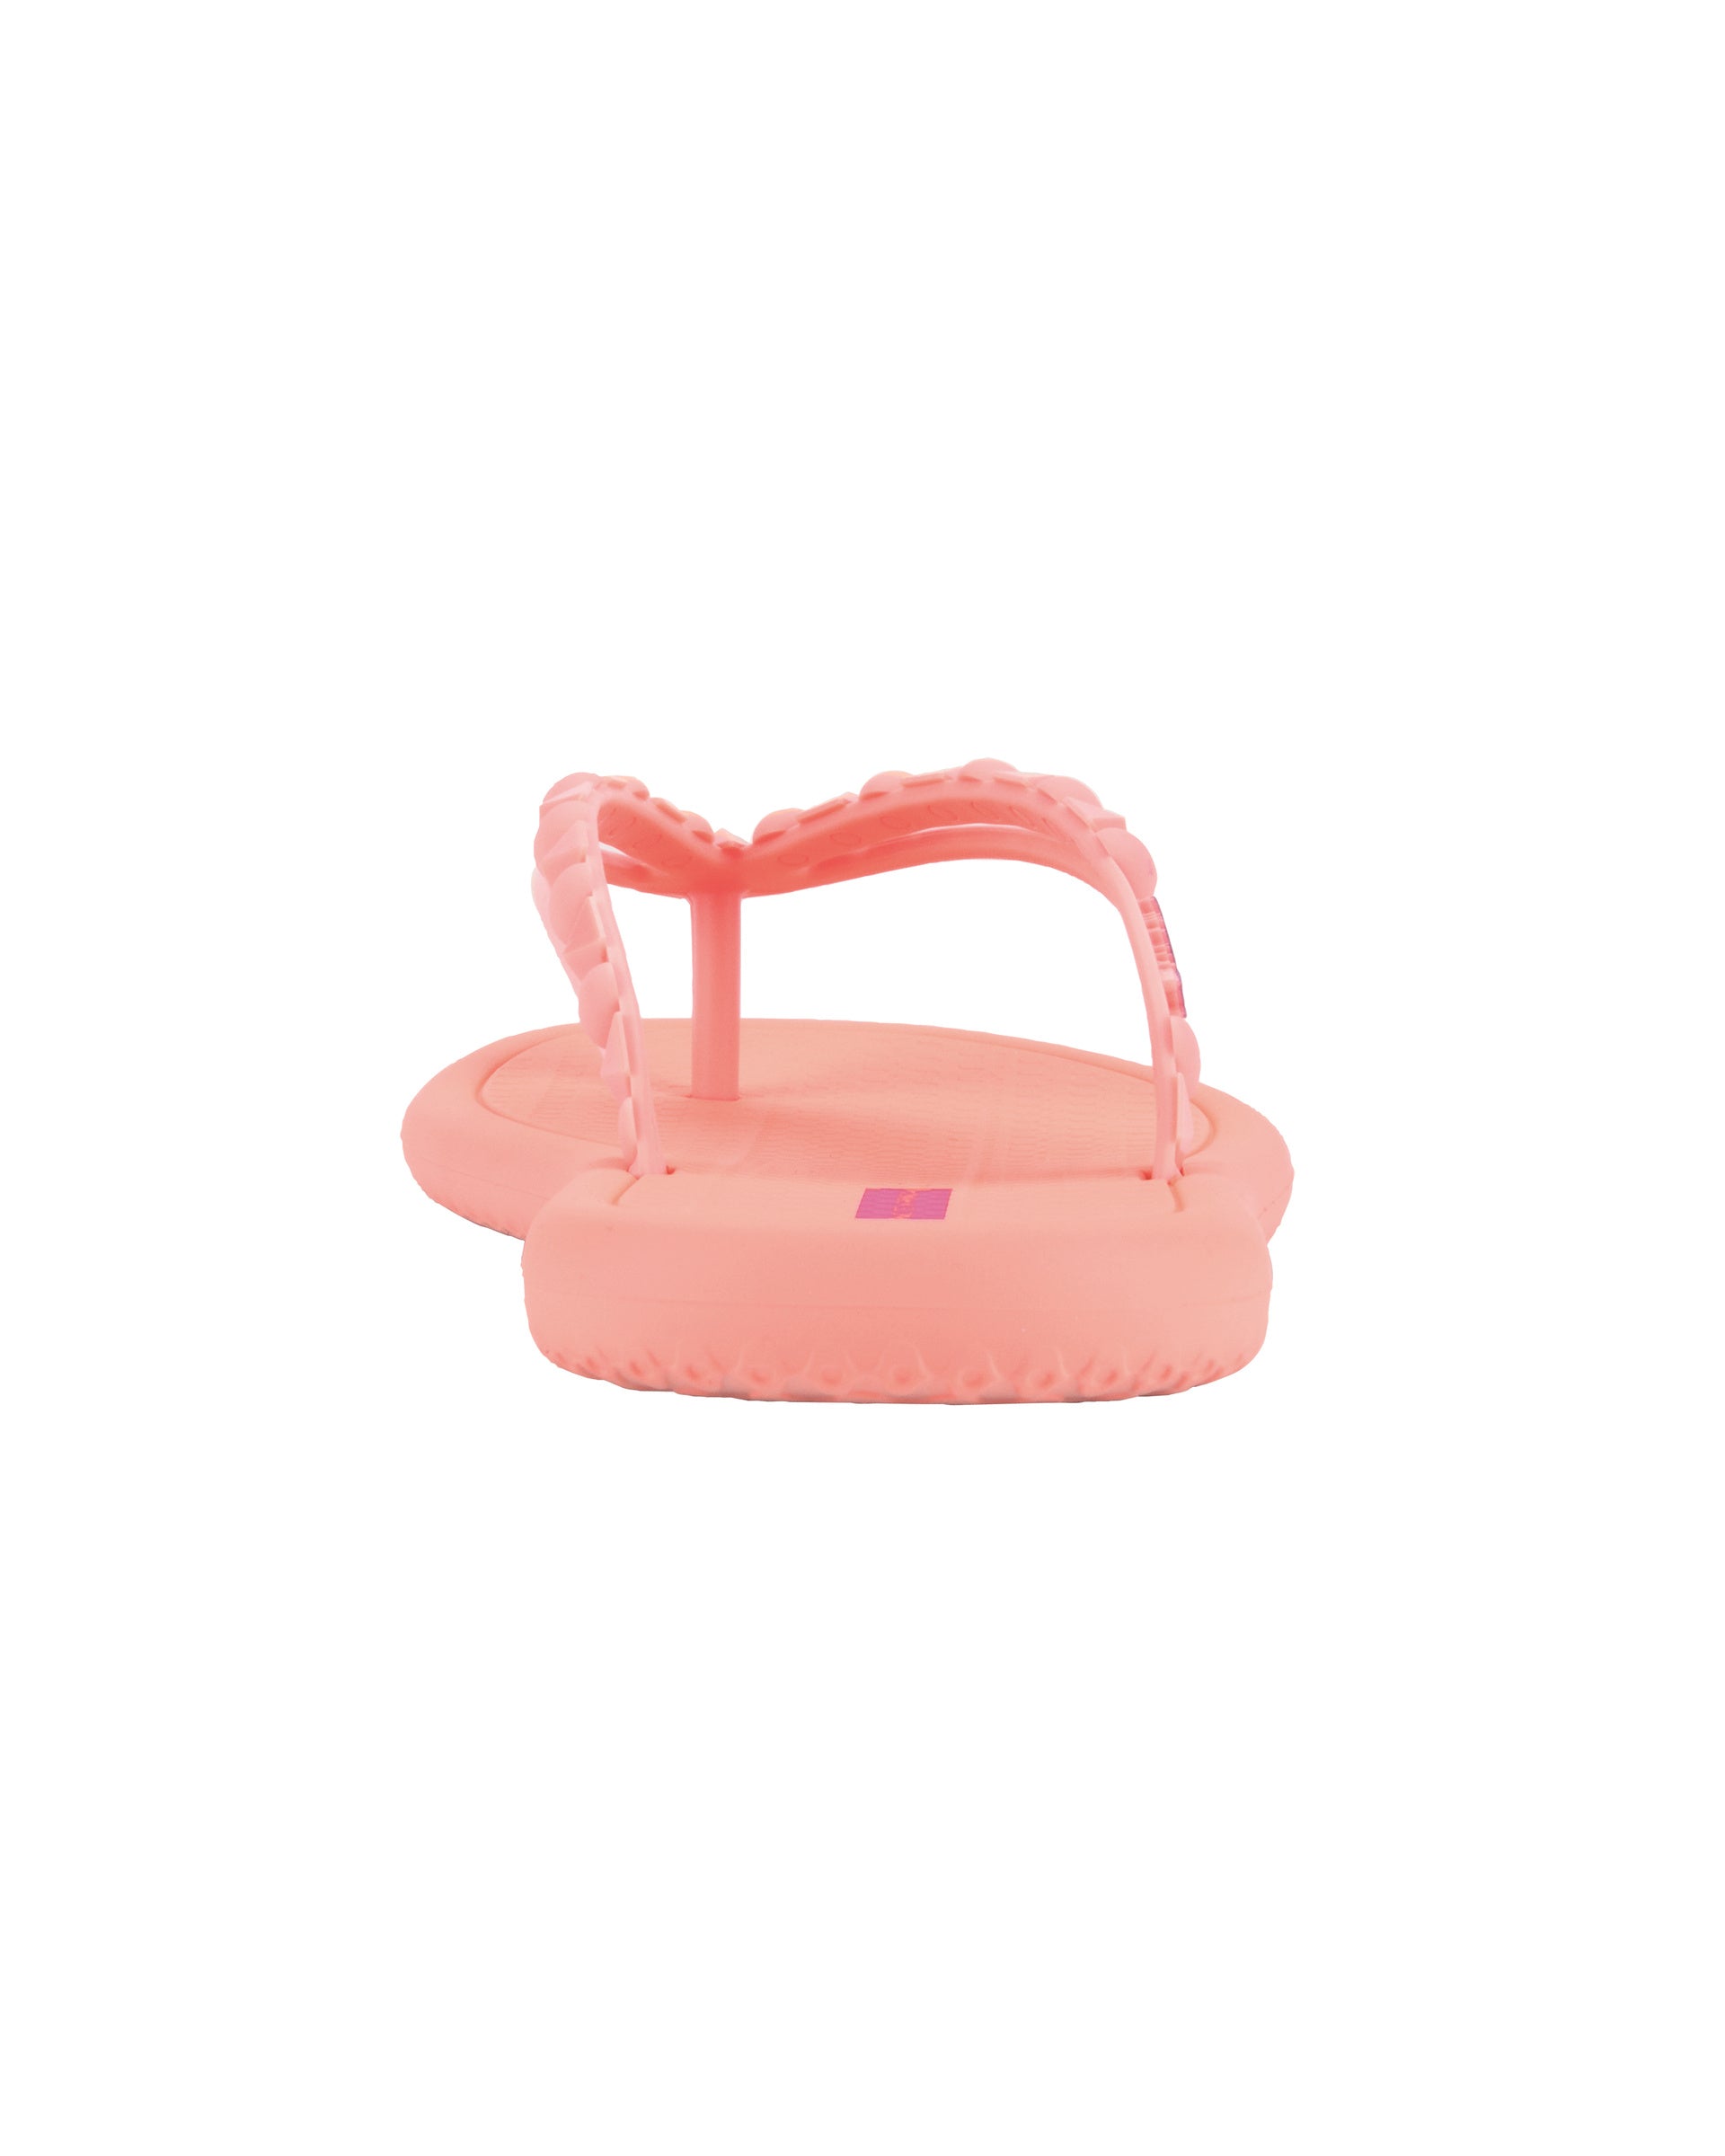 Back view of a light pink Ipanema Meu Sol women's flip flop with stud details on strap.